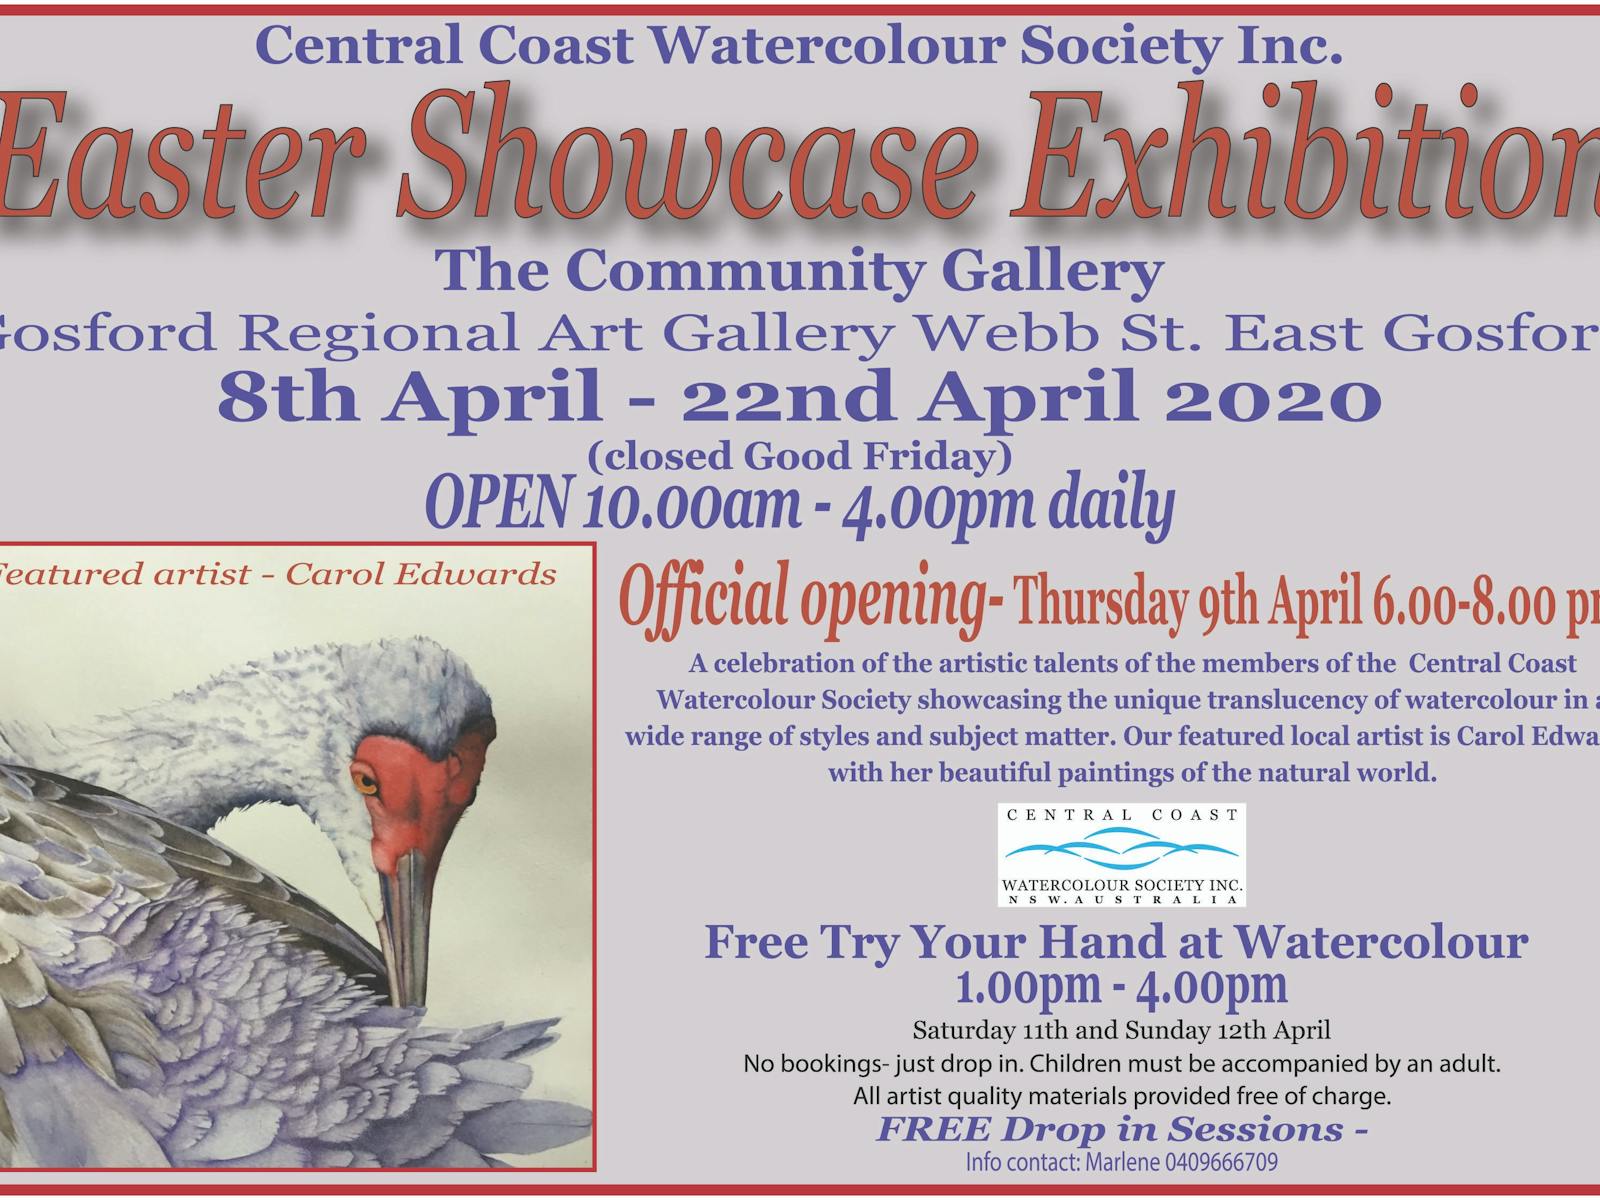 Image for Easter Showcase Exhibition of Central Coast Watercolour Society